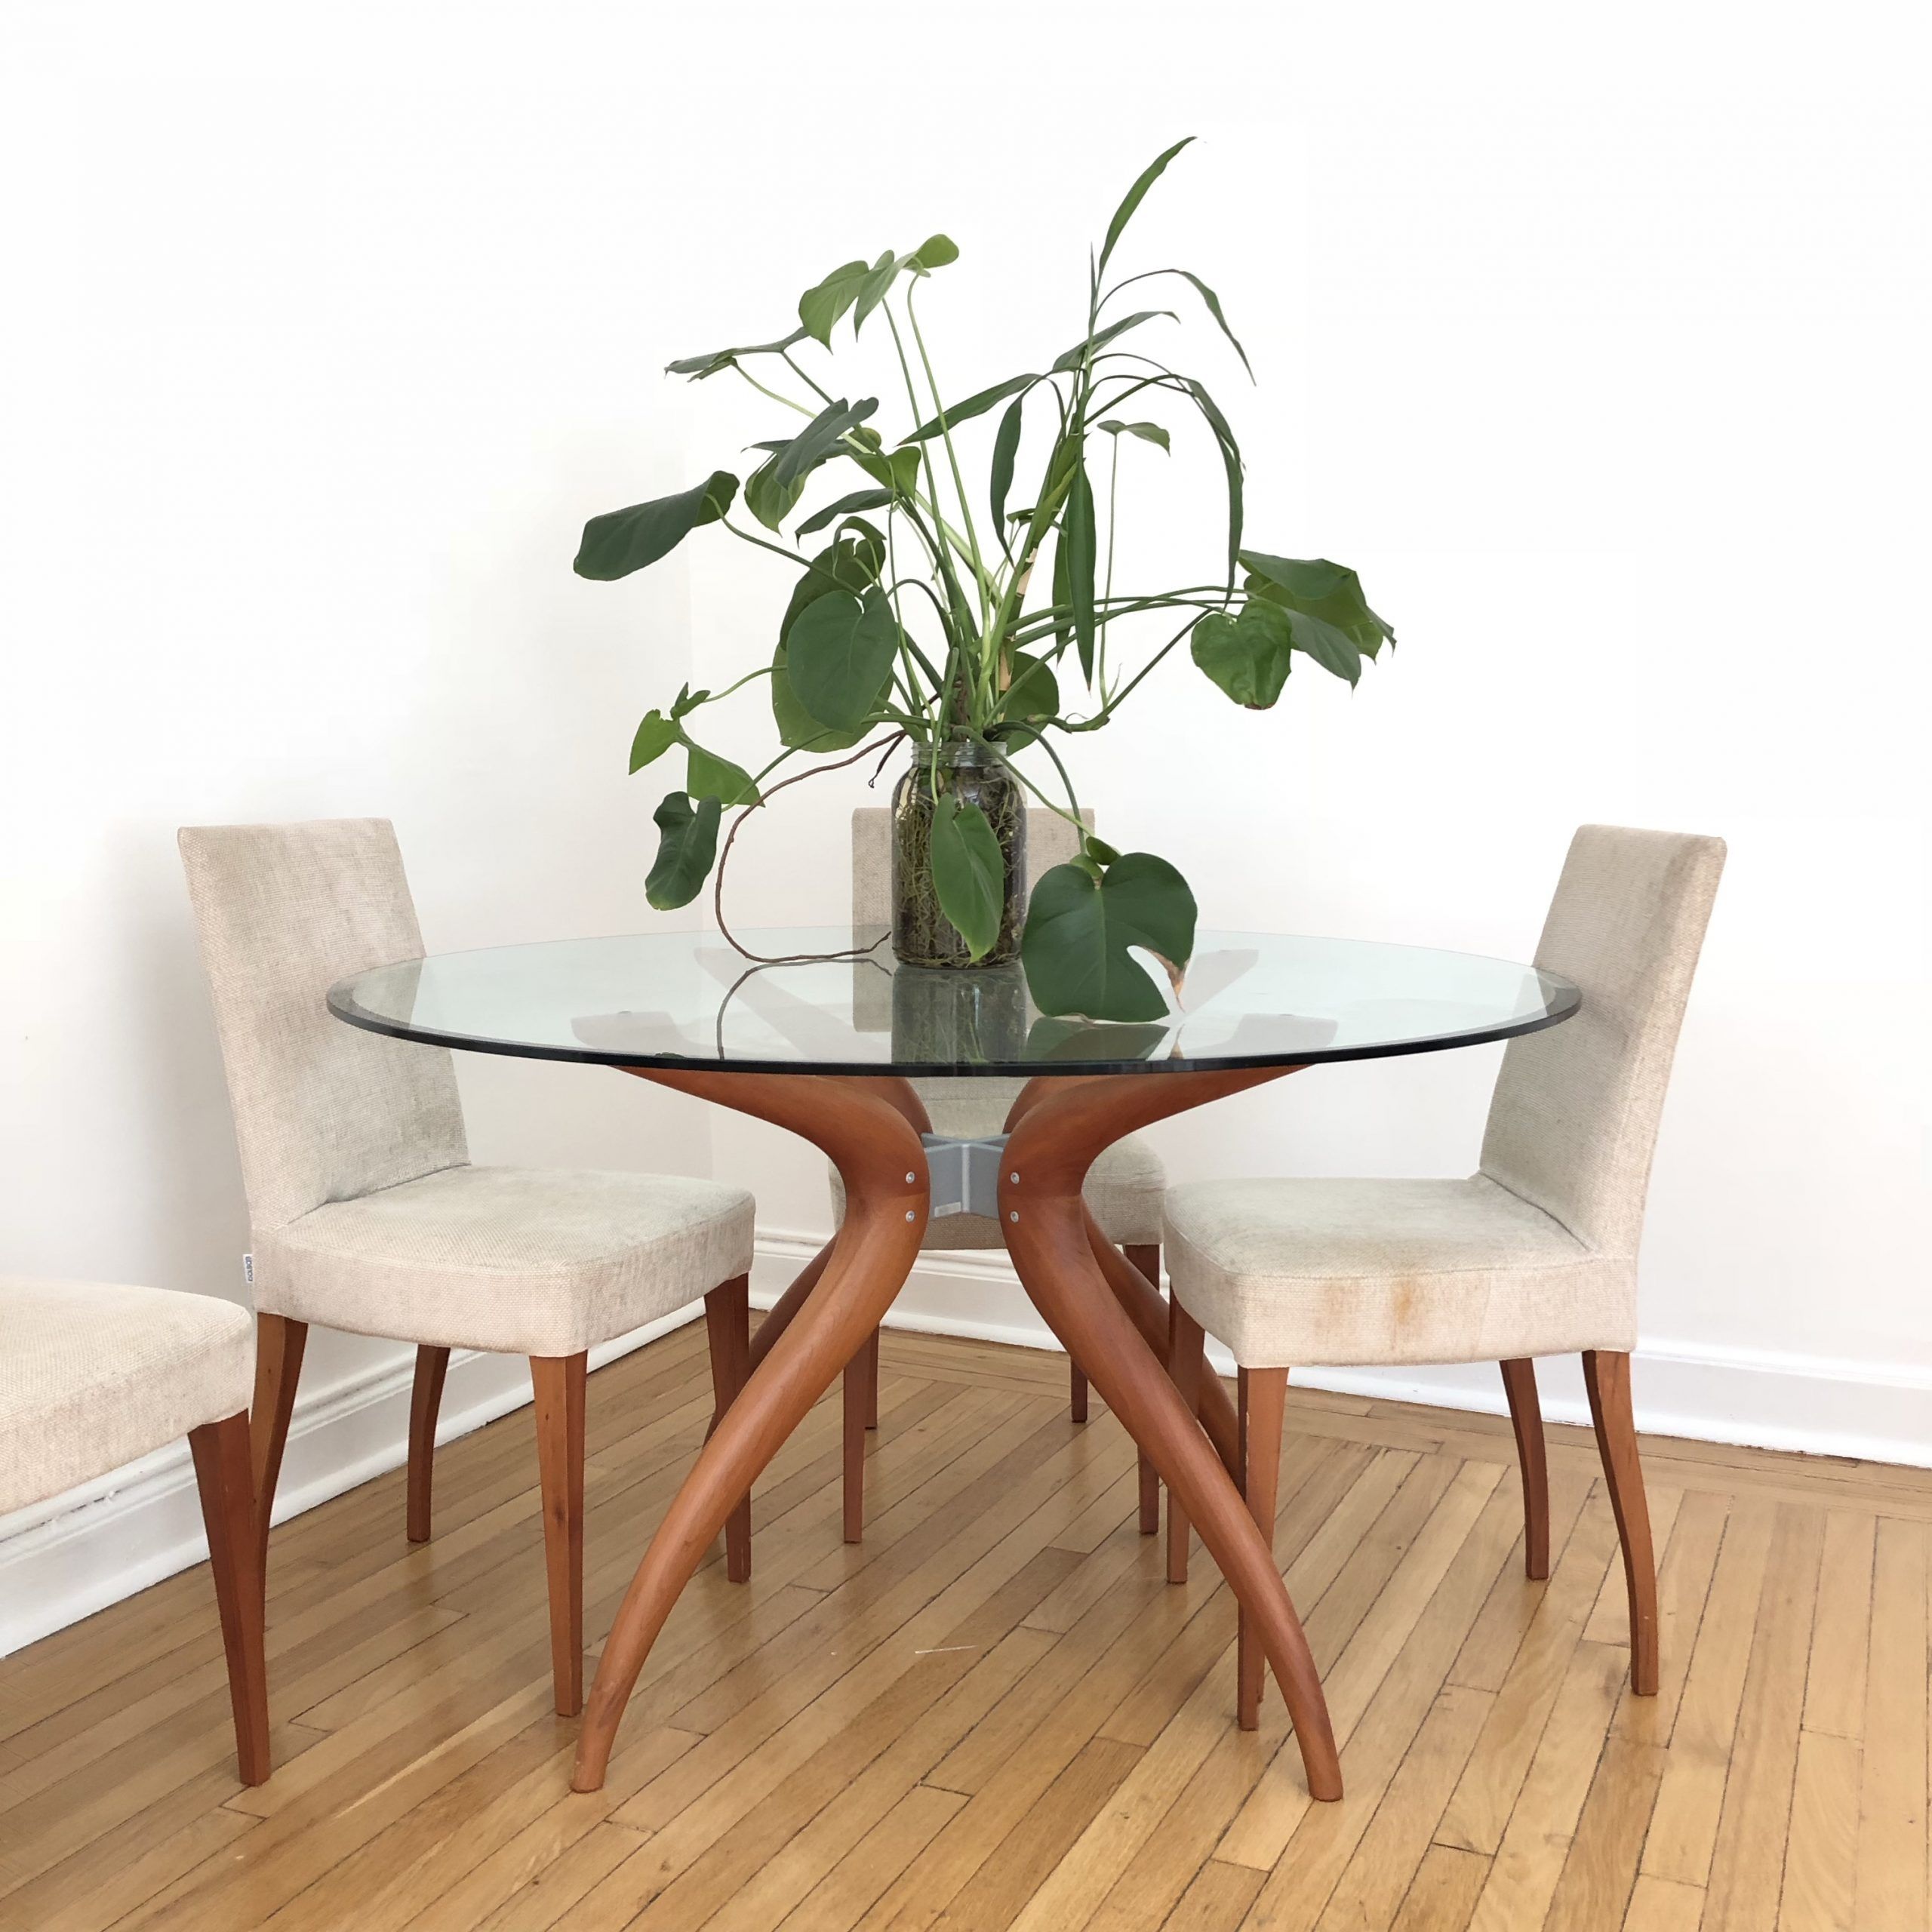 Porada Retro Round Glass Top Wooden Legs Dining – Depop In Most Popular Retro Round Glasstop Dining Tables (Photo 1 of 25)